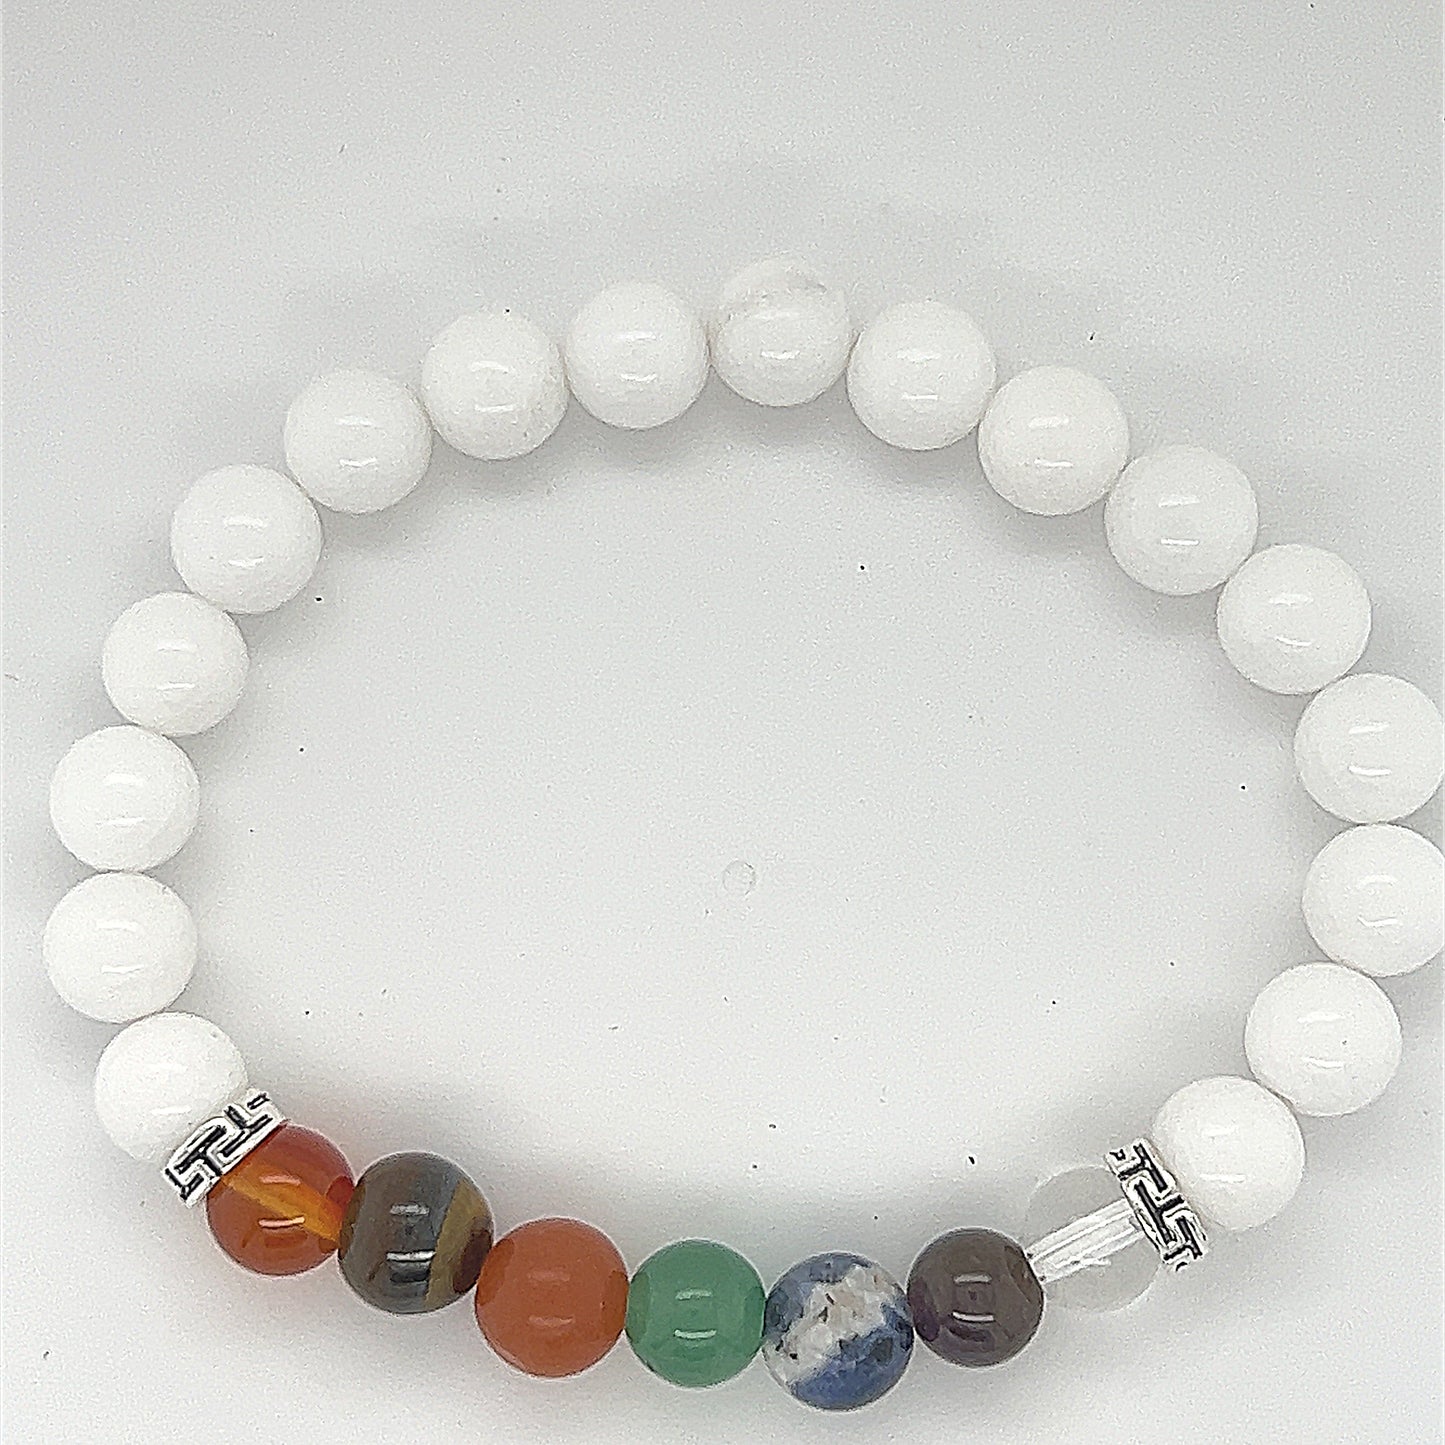 An everyday White Chakra Beaded Bracelet with stacking stones from Super Silver.